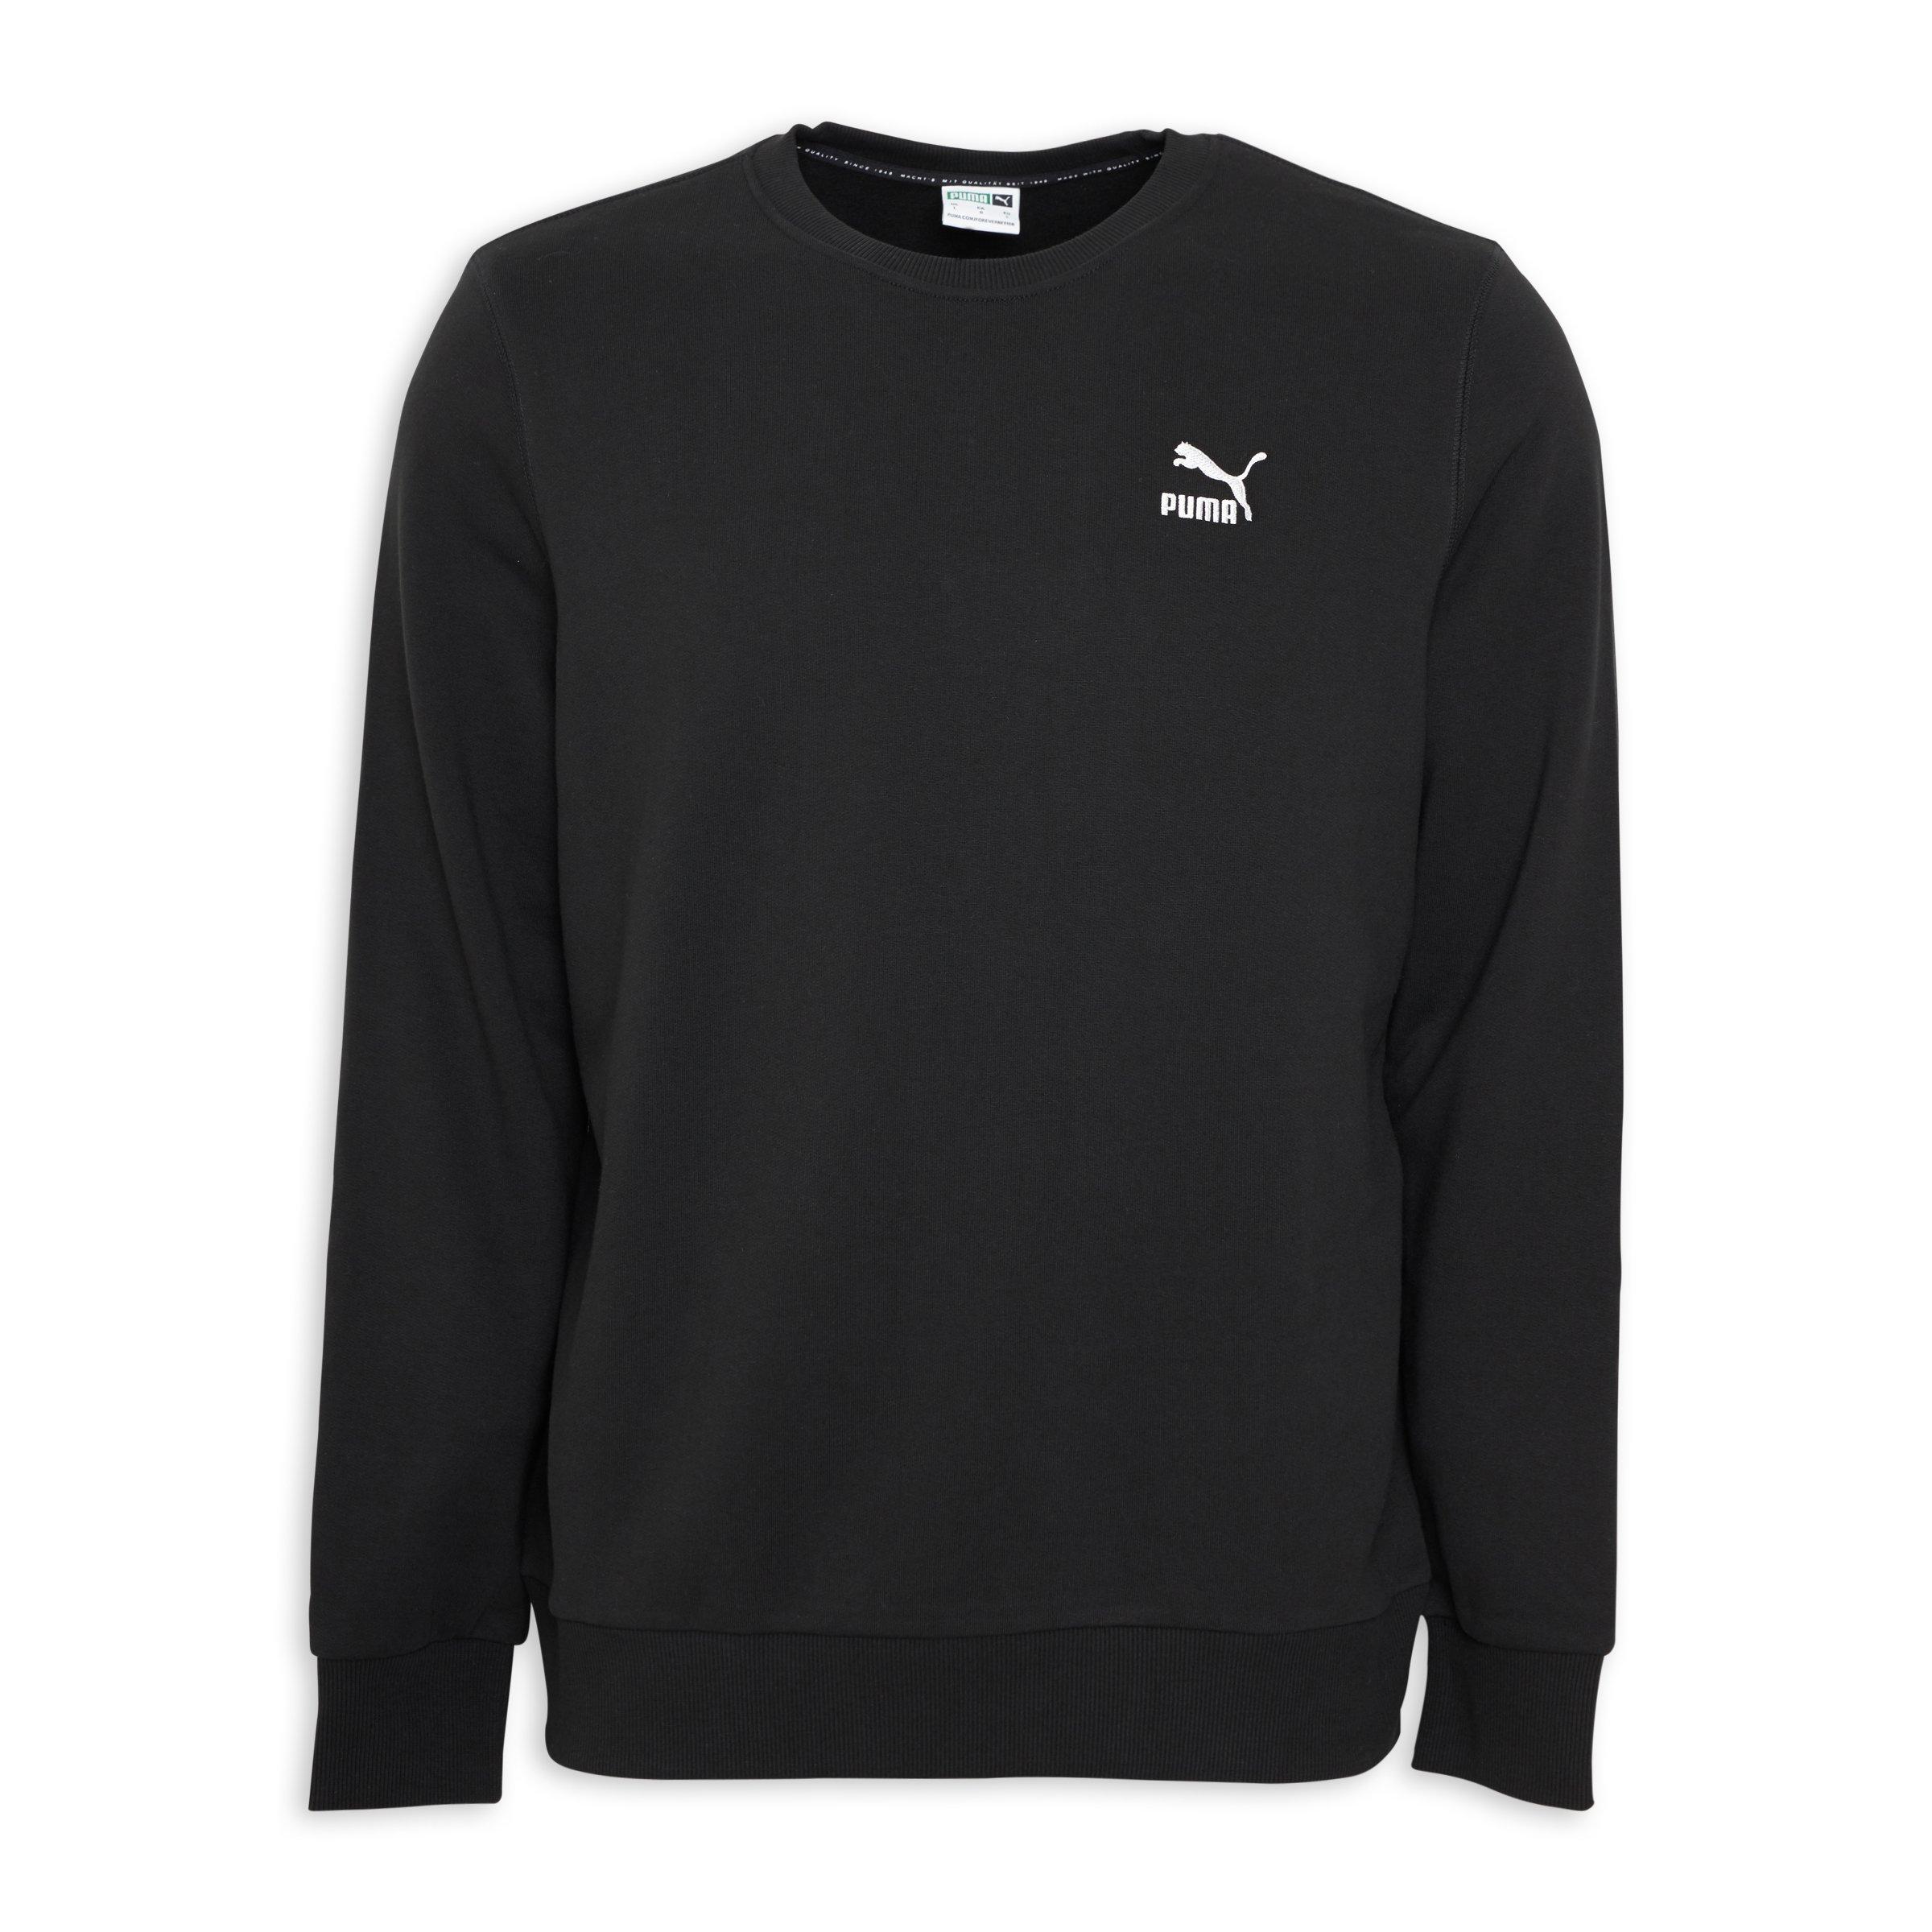 Buy Puma Classics Embroidered Crew neck Sweater Clothing Online ...